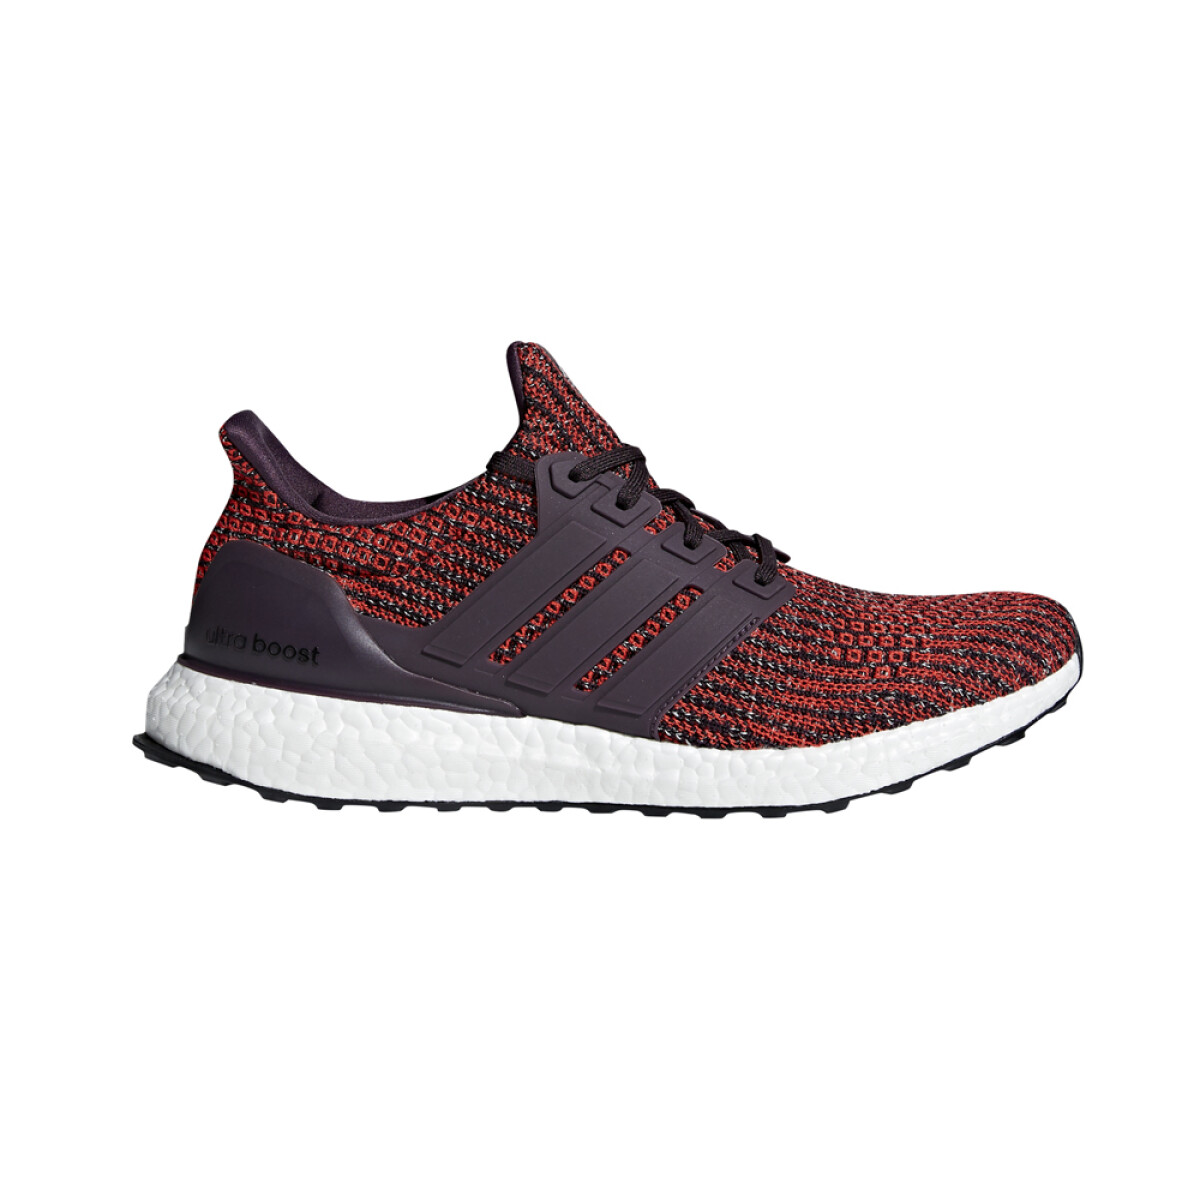 adidas UltraBOOST - NOBLE RED/CORE BLACK 